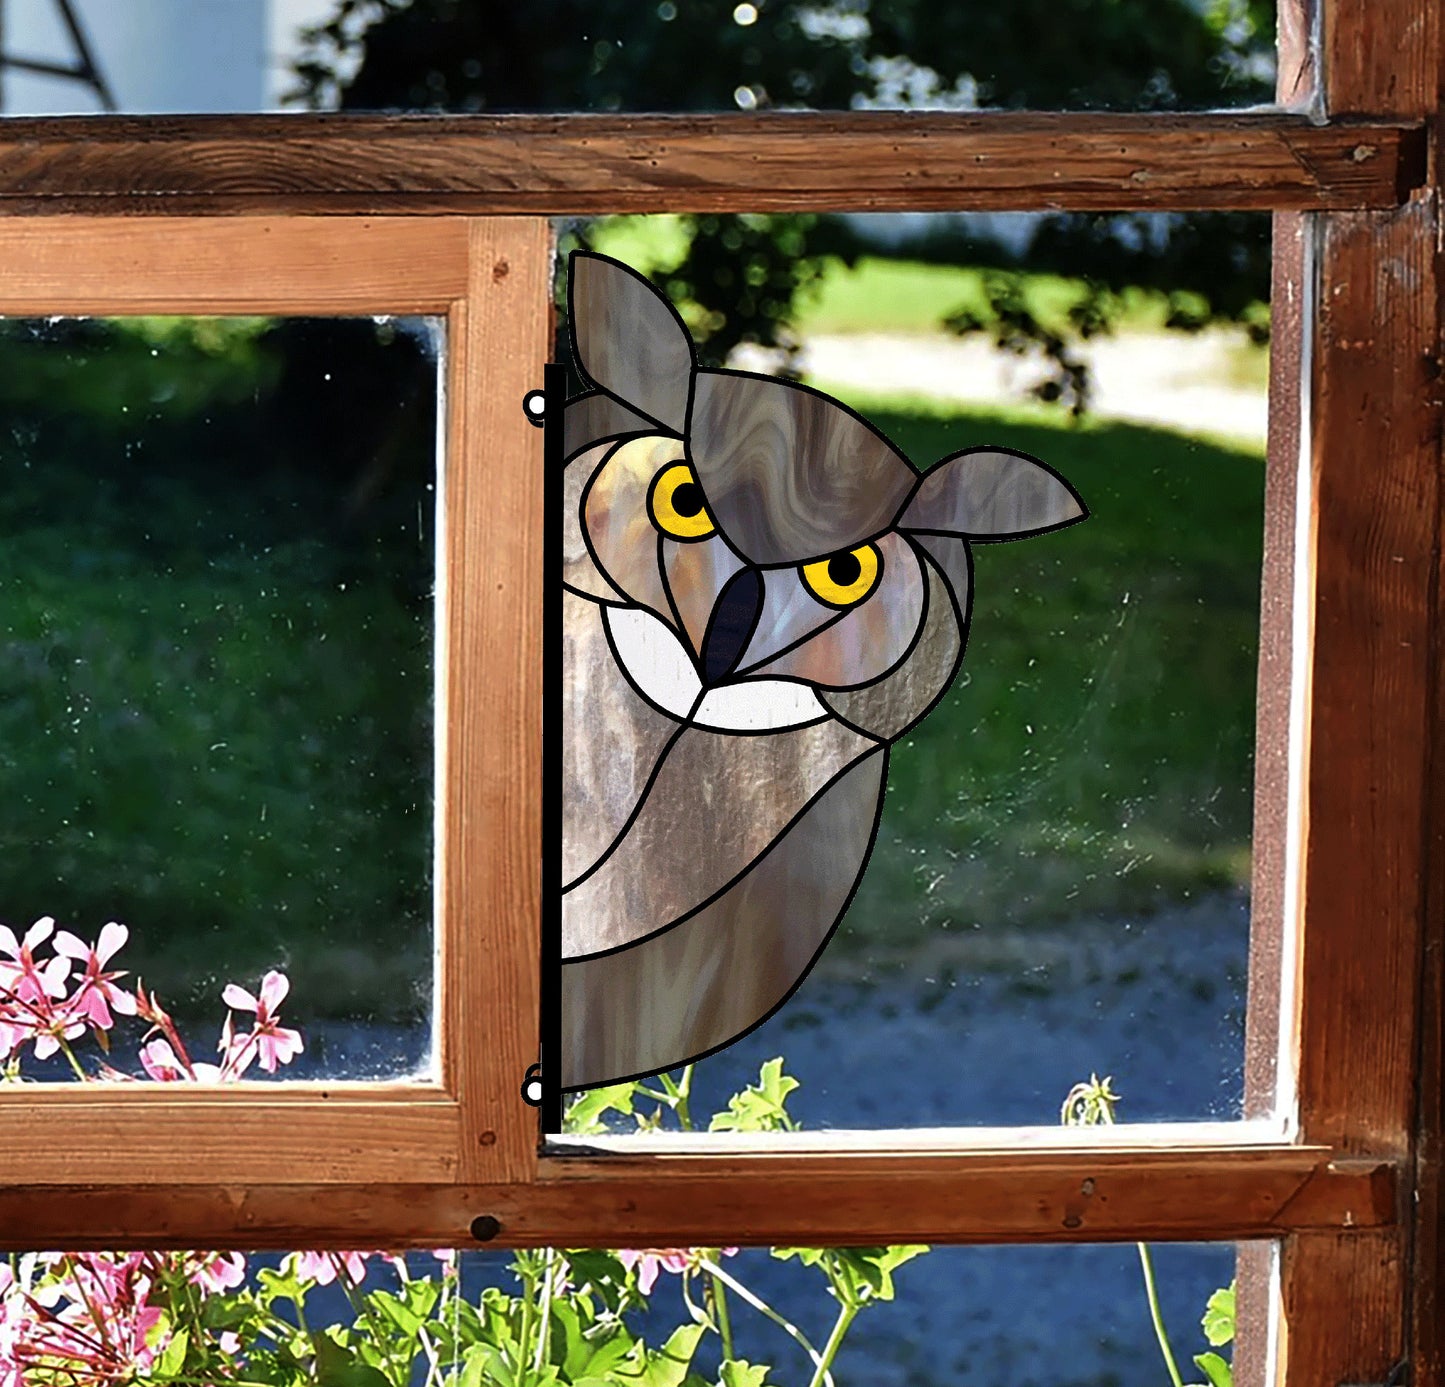 Animal stained glass patterns, horned owl, instant pdf downloads, one of four patterns in the pack, shown in a window